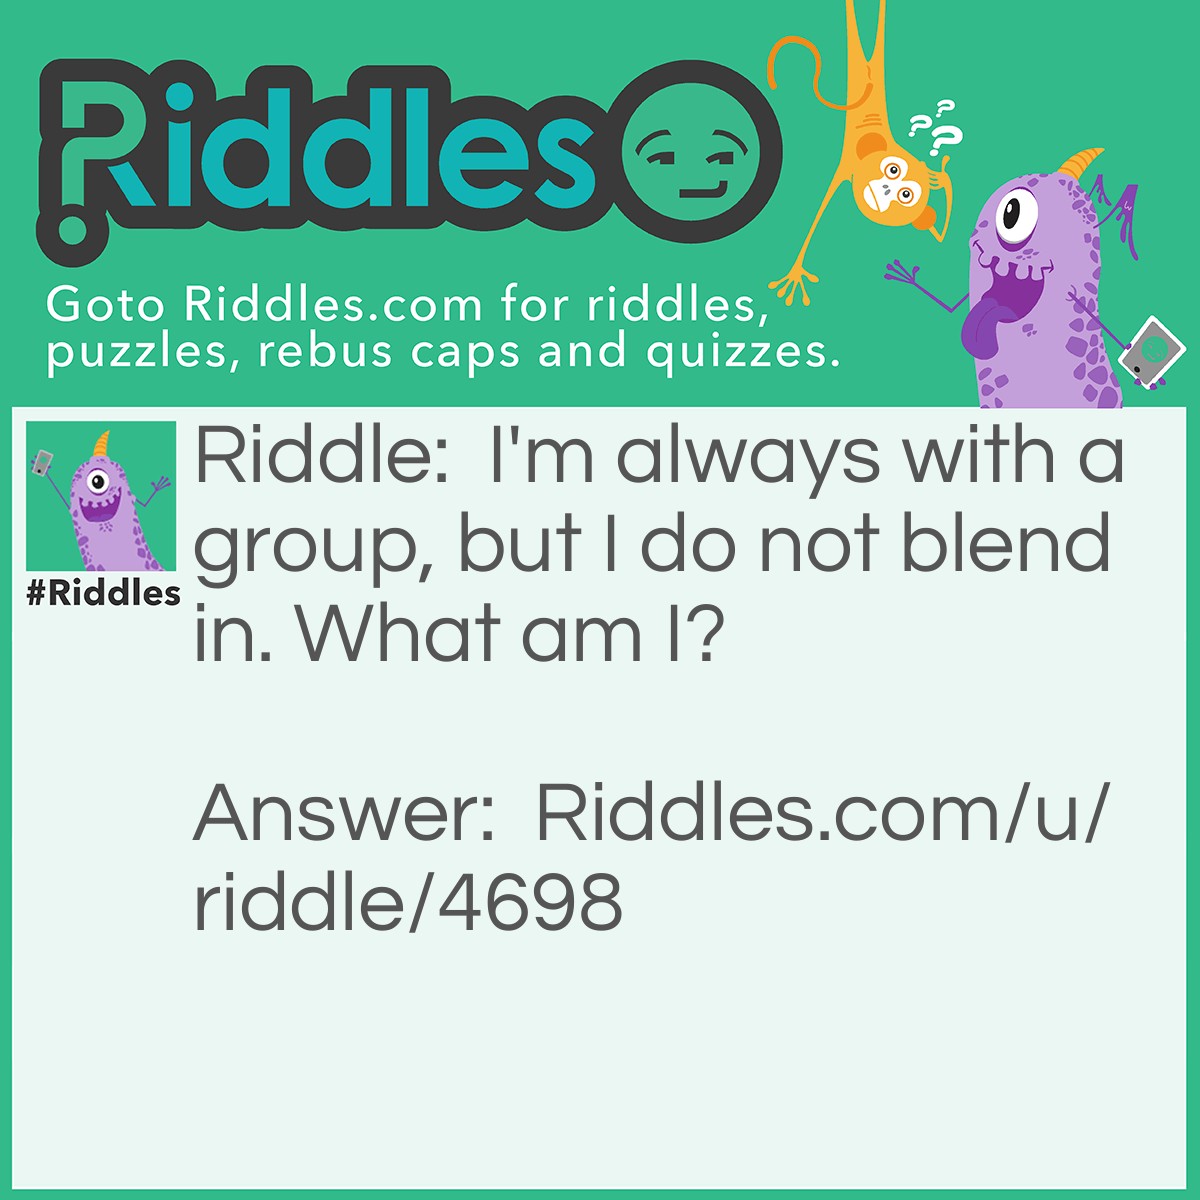 Riddle: I'm always with a group, but I do not blend in. What am I? Answer: An individual.